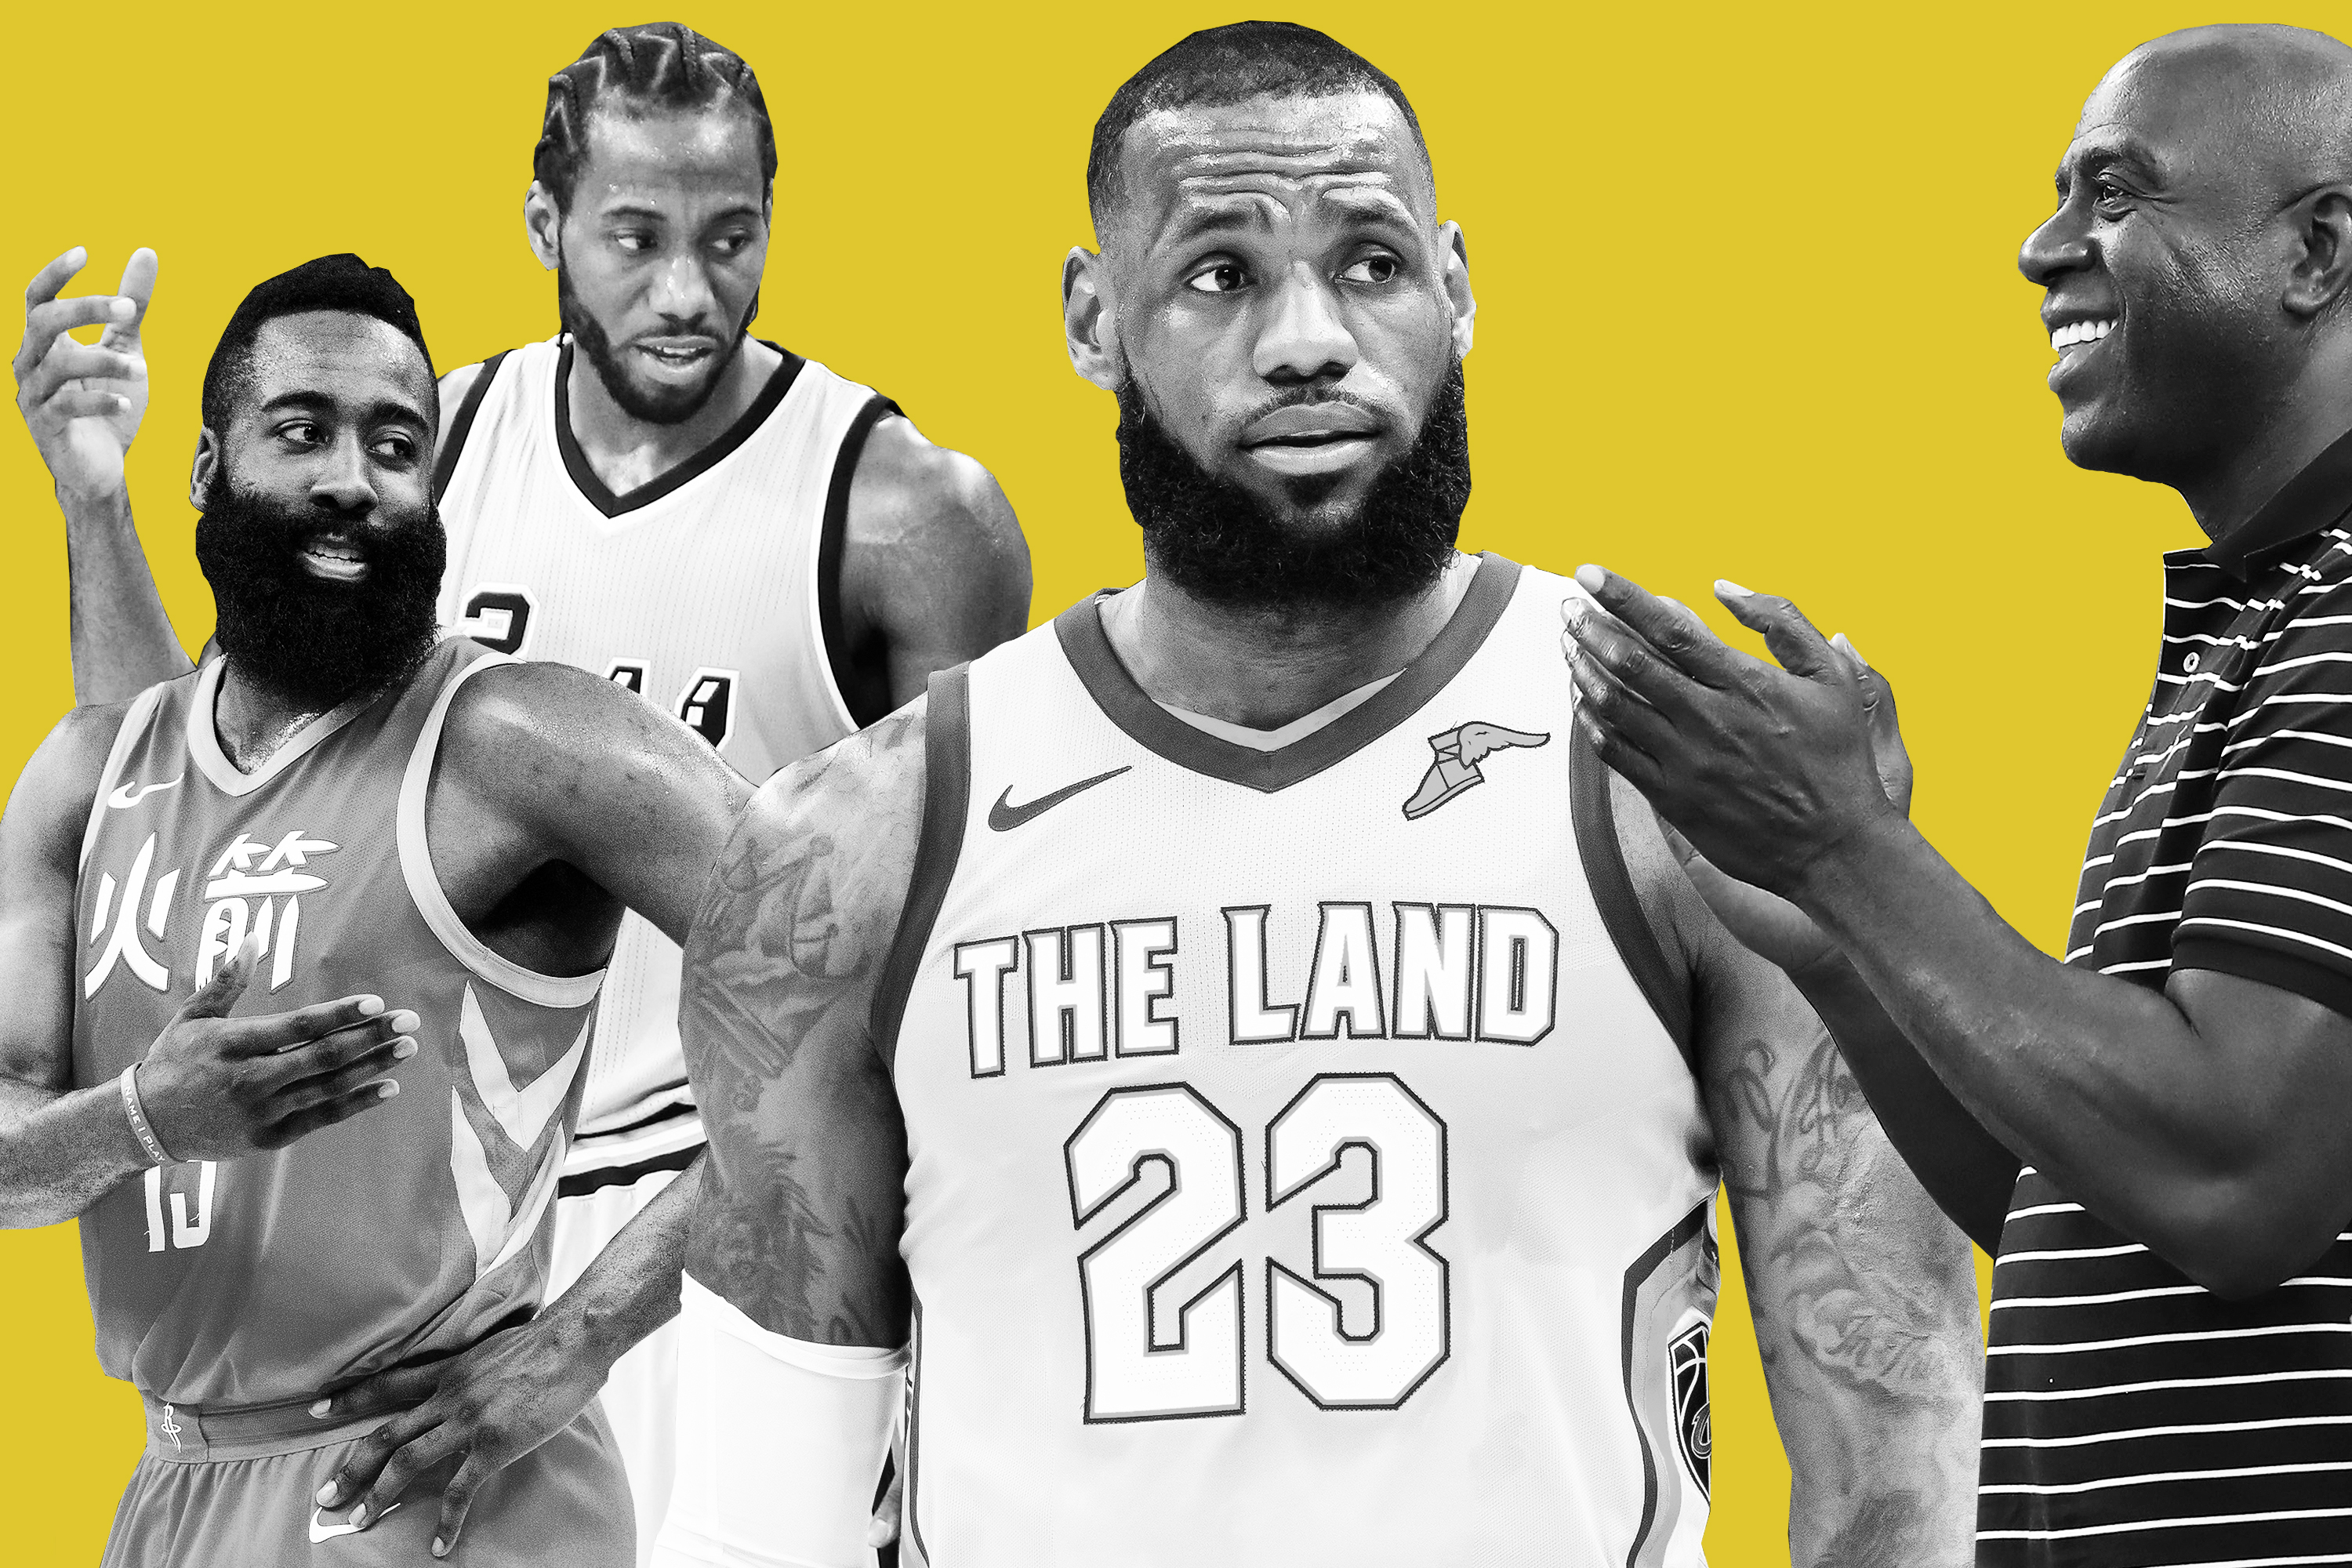 Lebron James' decision to leave the Cavaliers for the Lakers isn't  surprising — but his 2010 move changed the NBA forever